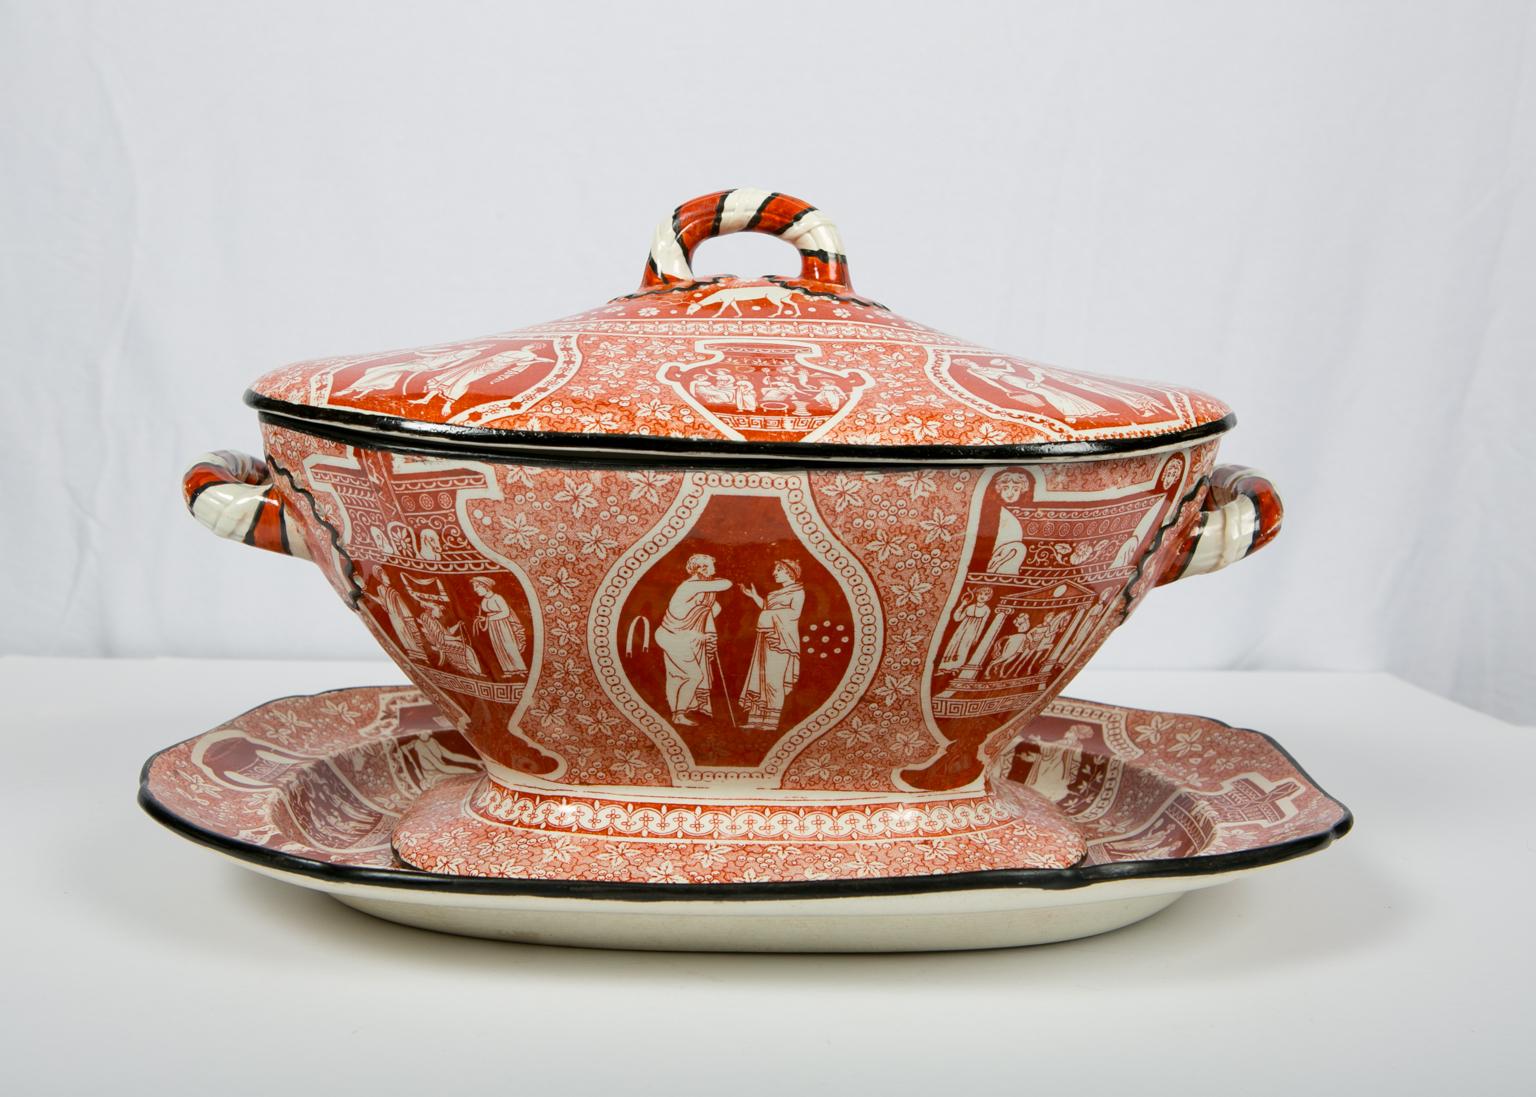 Neoclassical Antique Red Greek Ware Soup Tureen Decorated with Classical Figures circa 1810